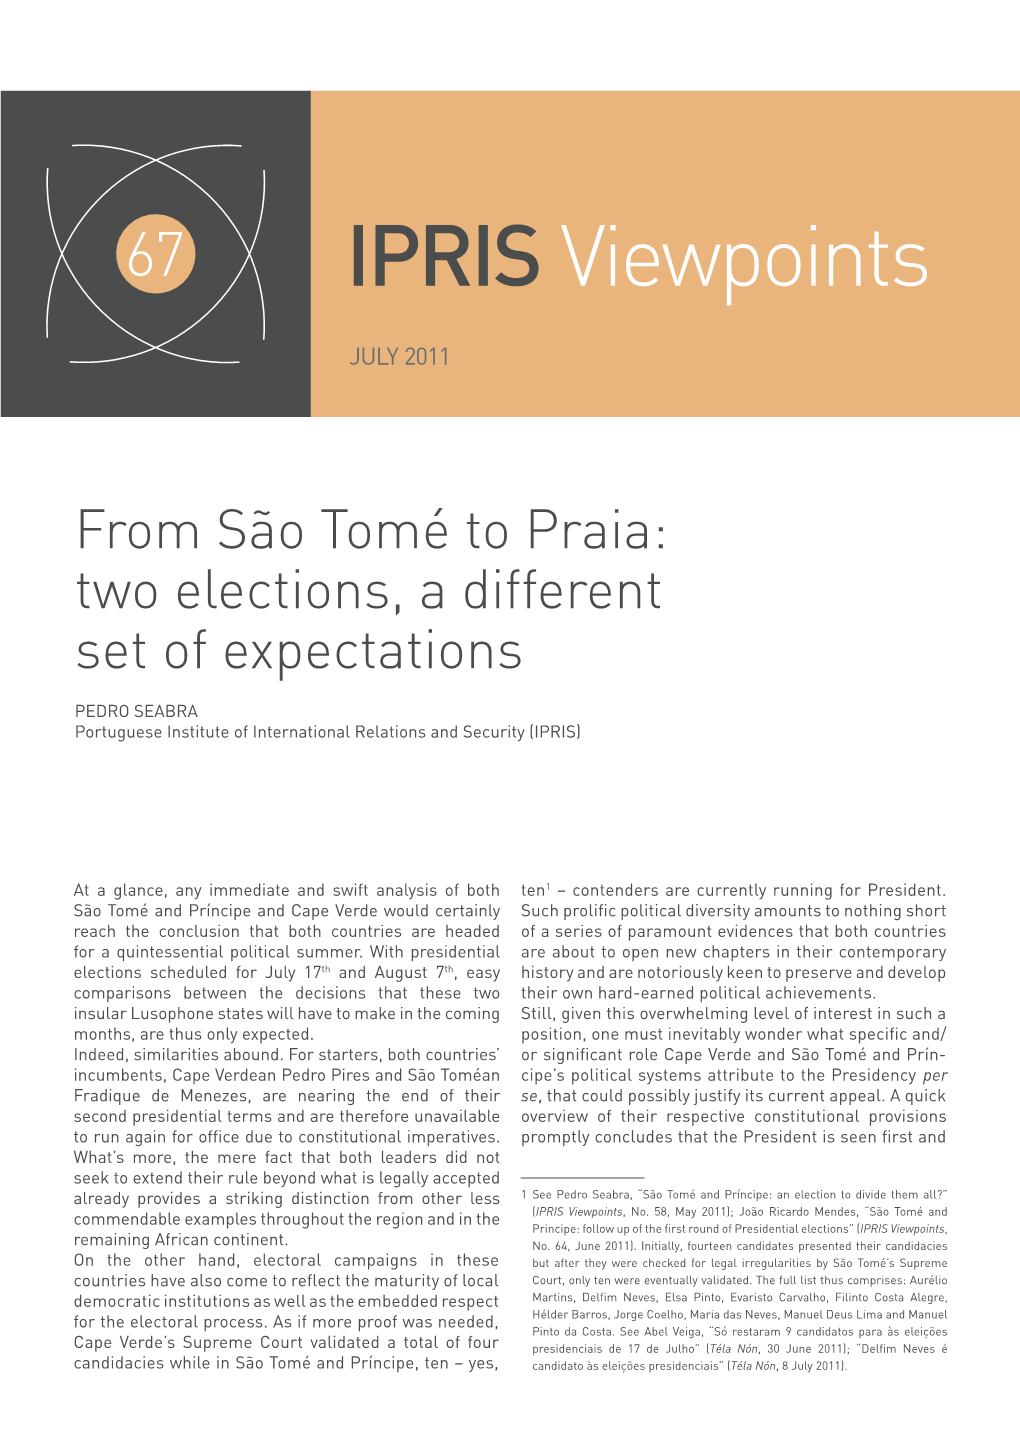 IPRIS Viewpoints